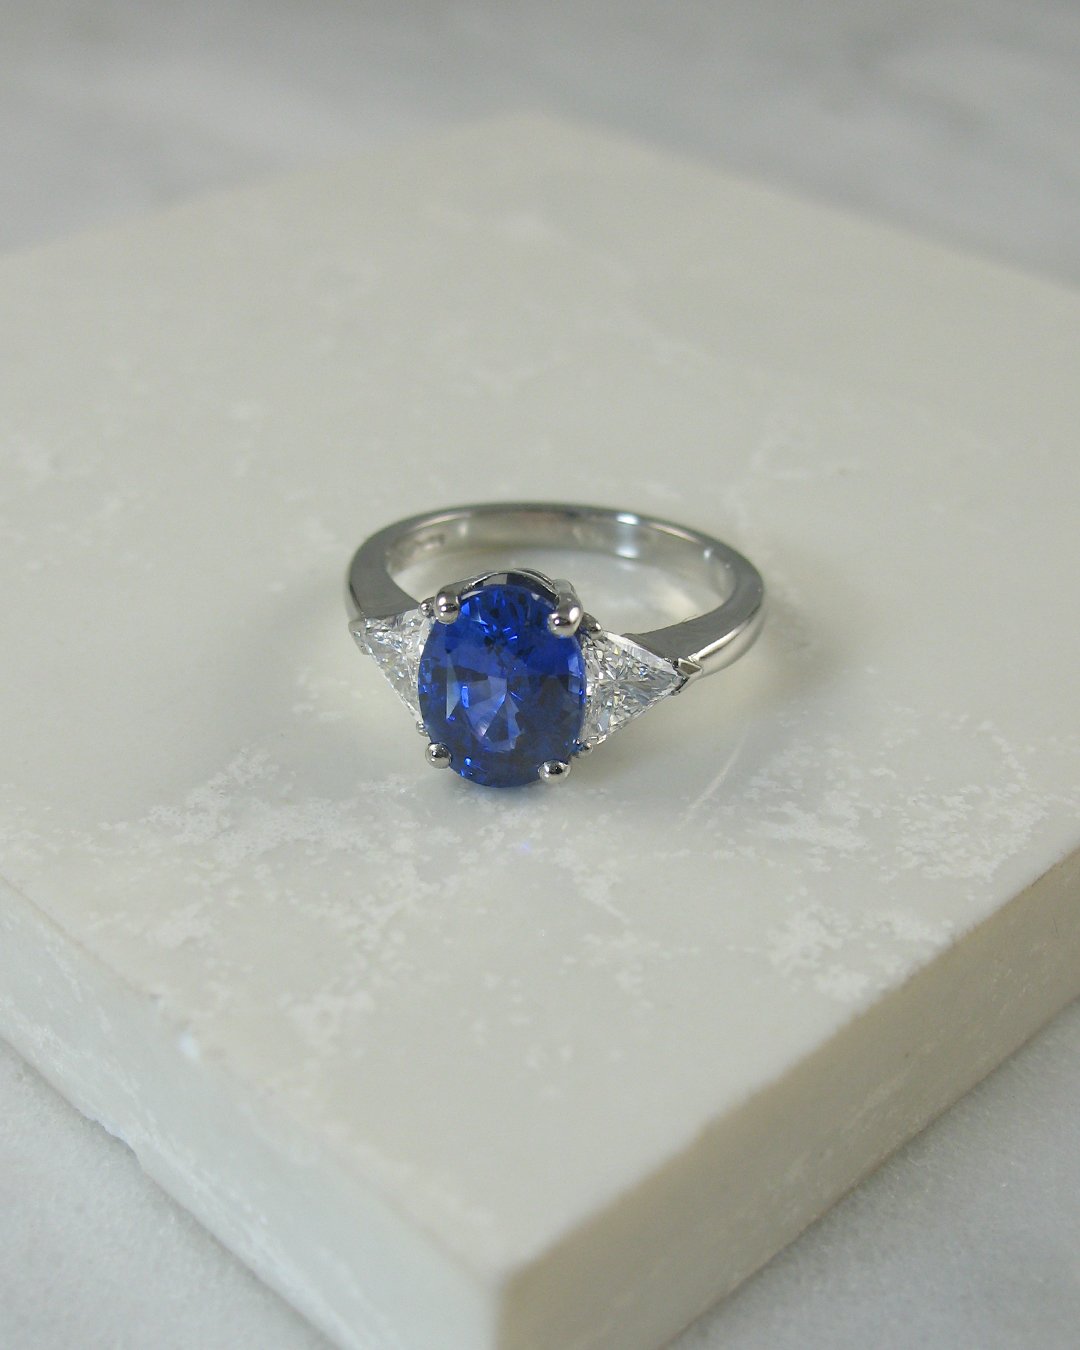 A bespoke sapphire engagement ring with diamond shoulders